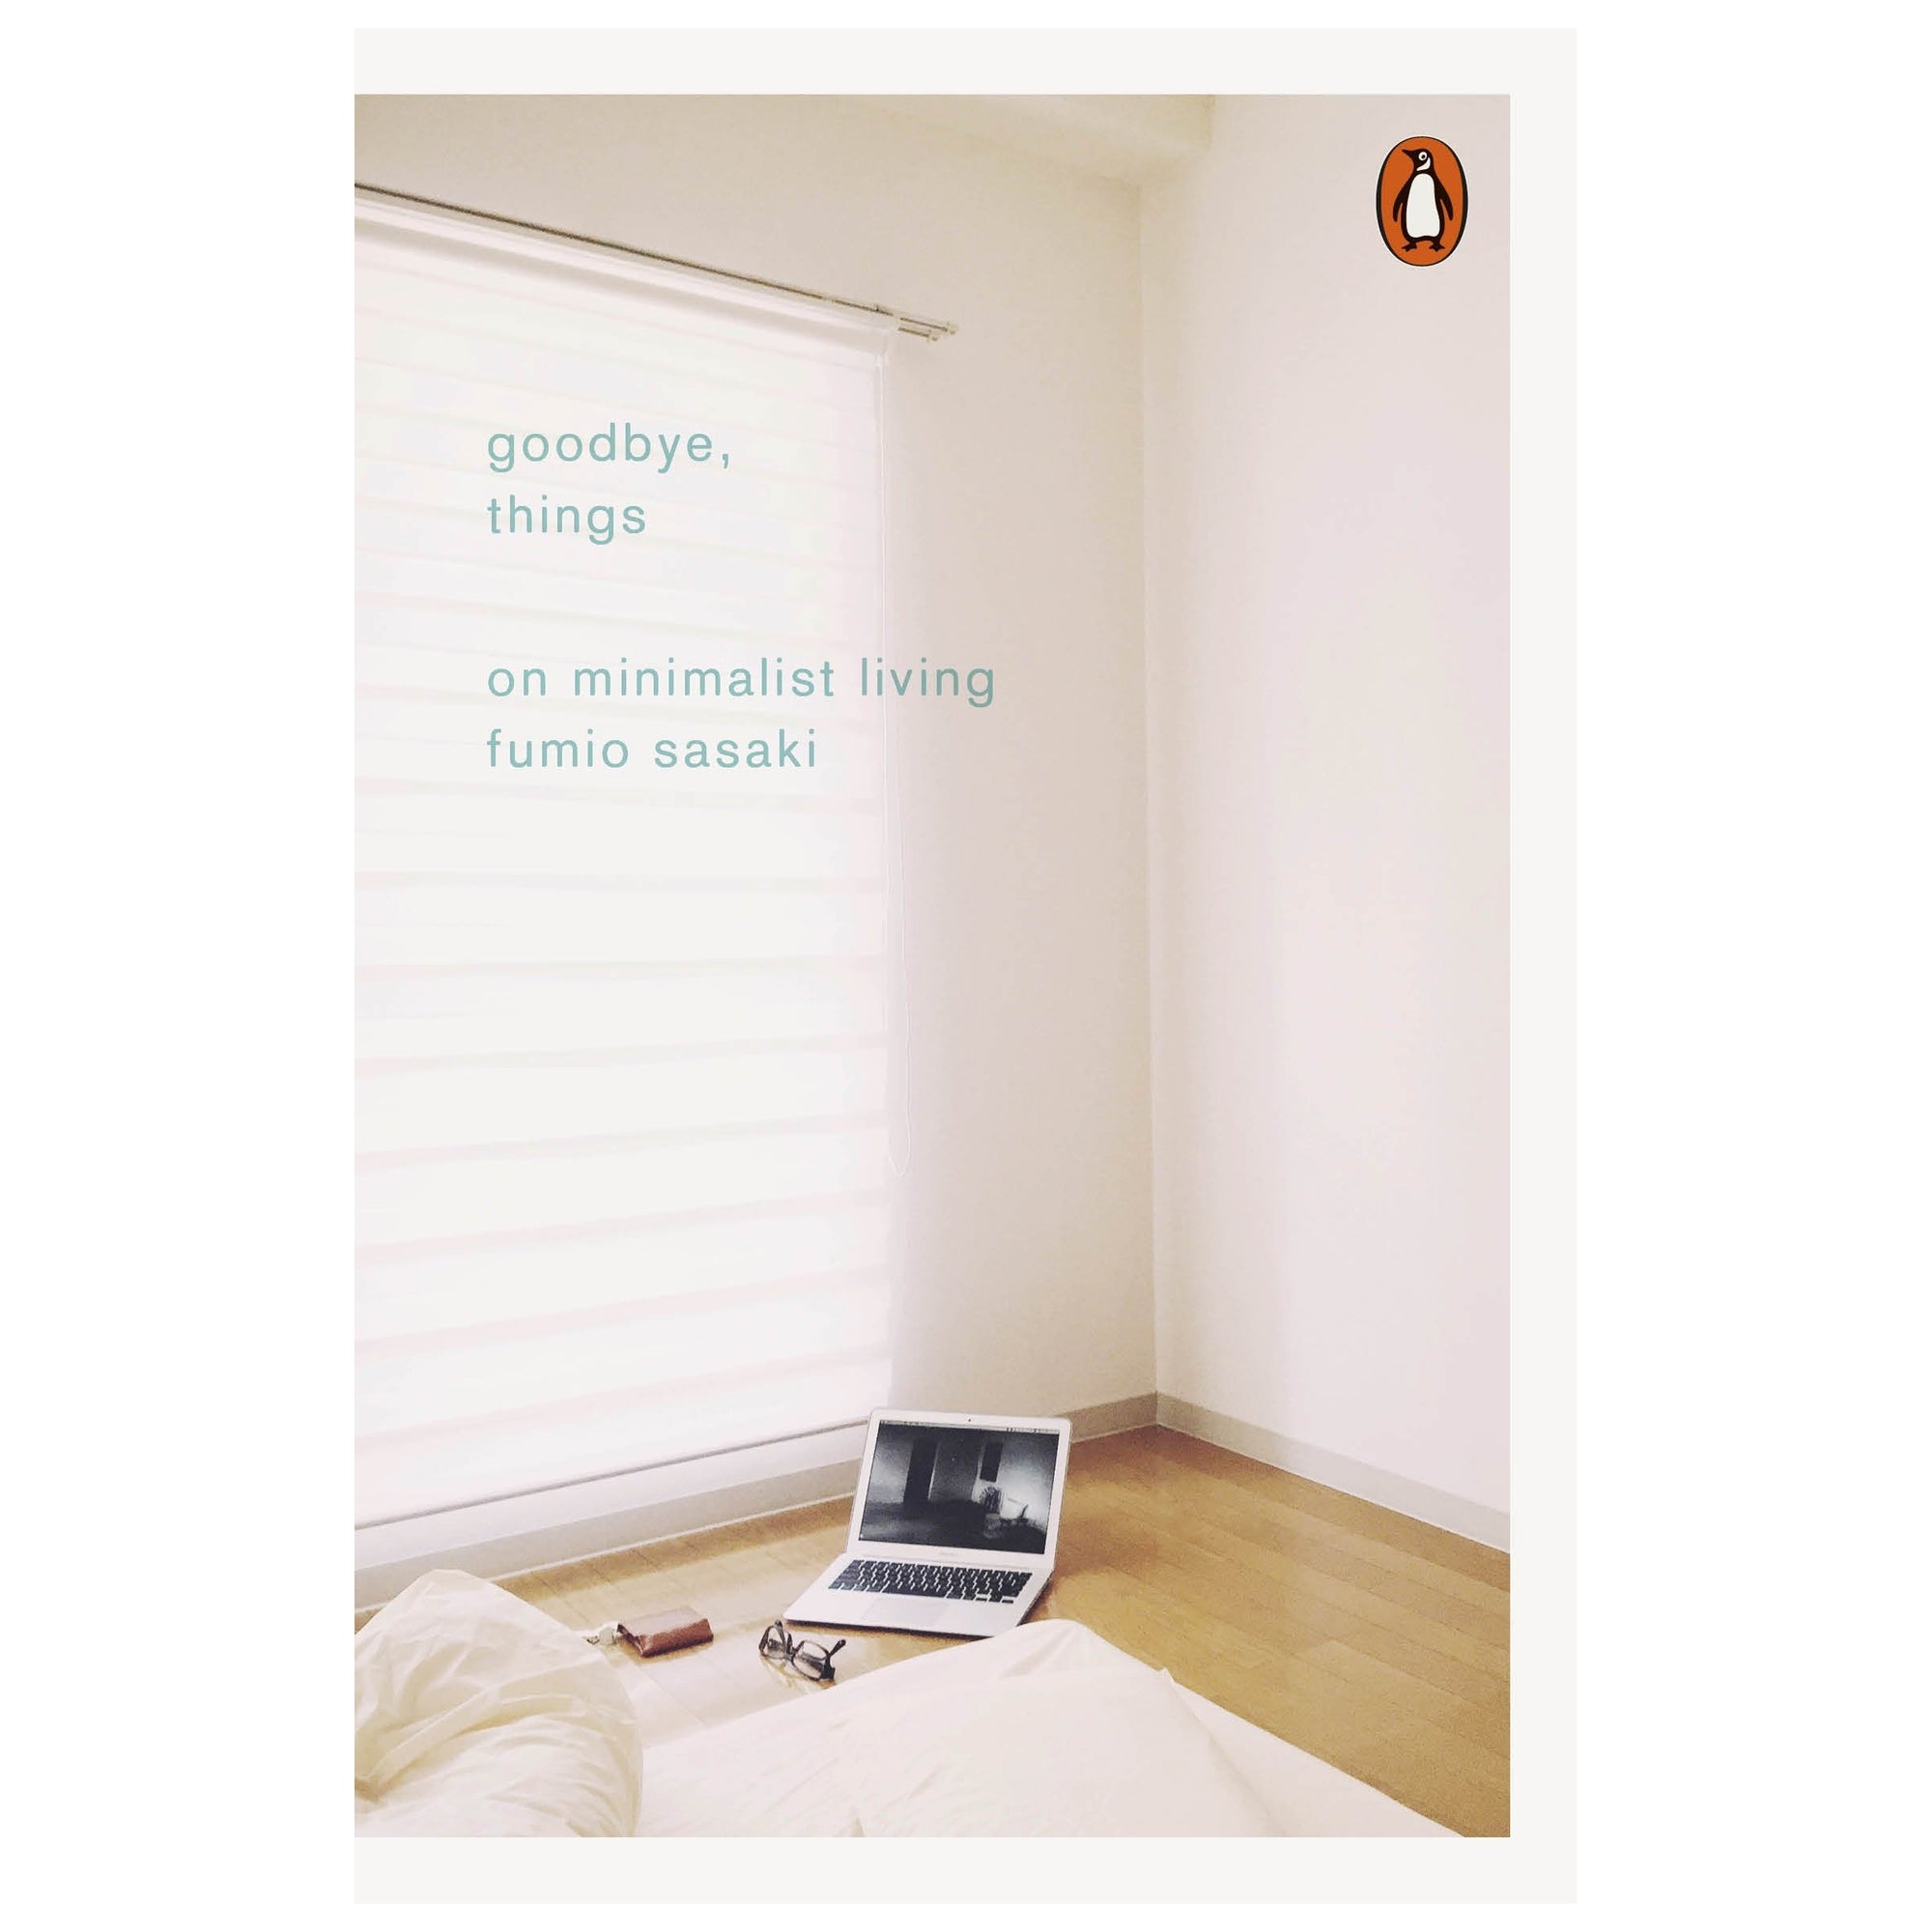 Goodby, Things. On Minimalist Living